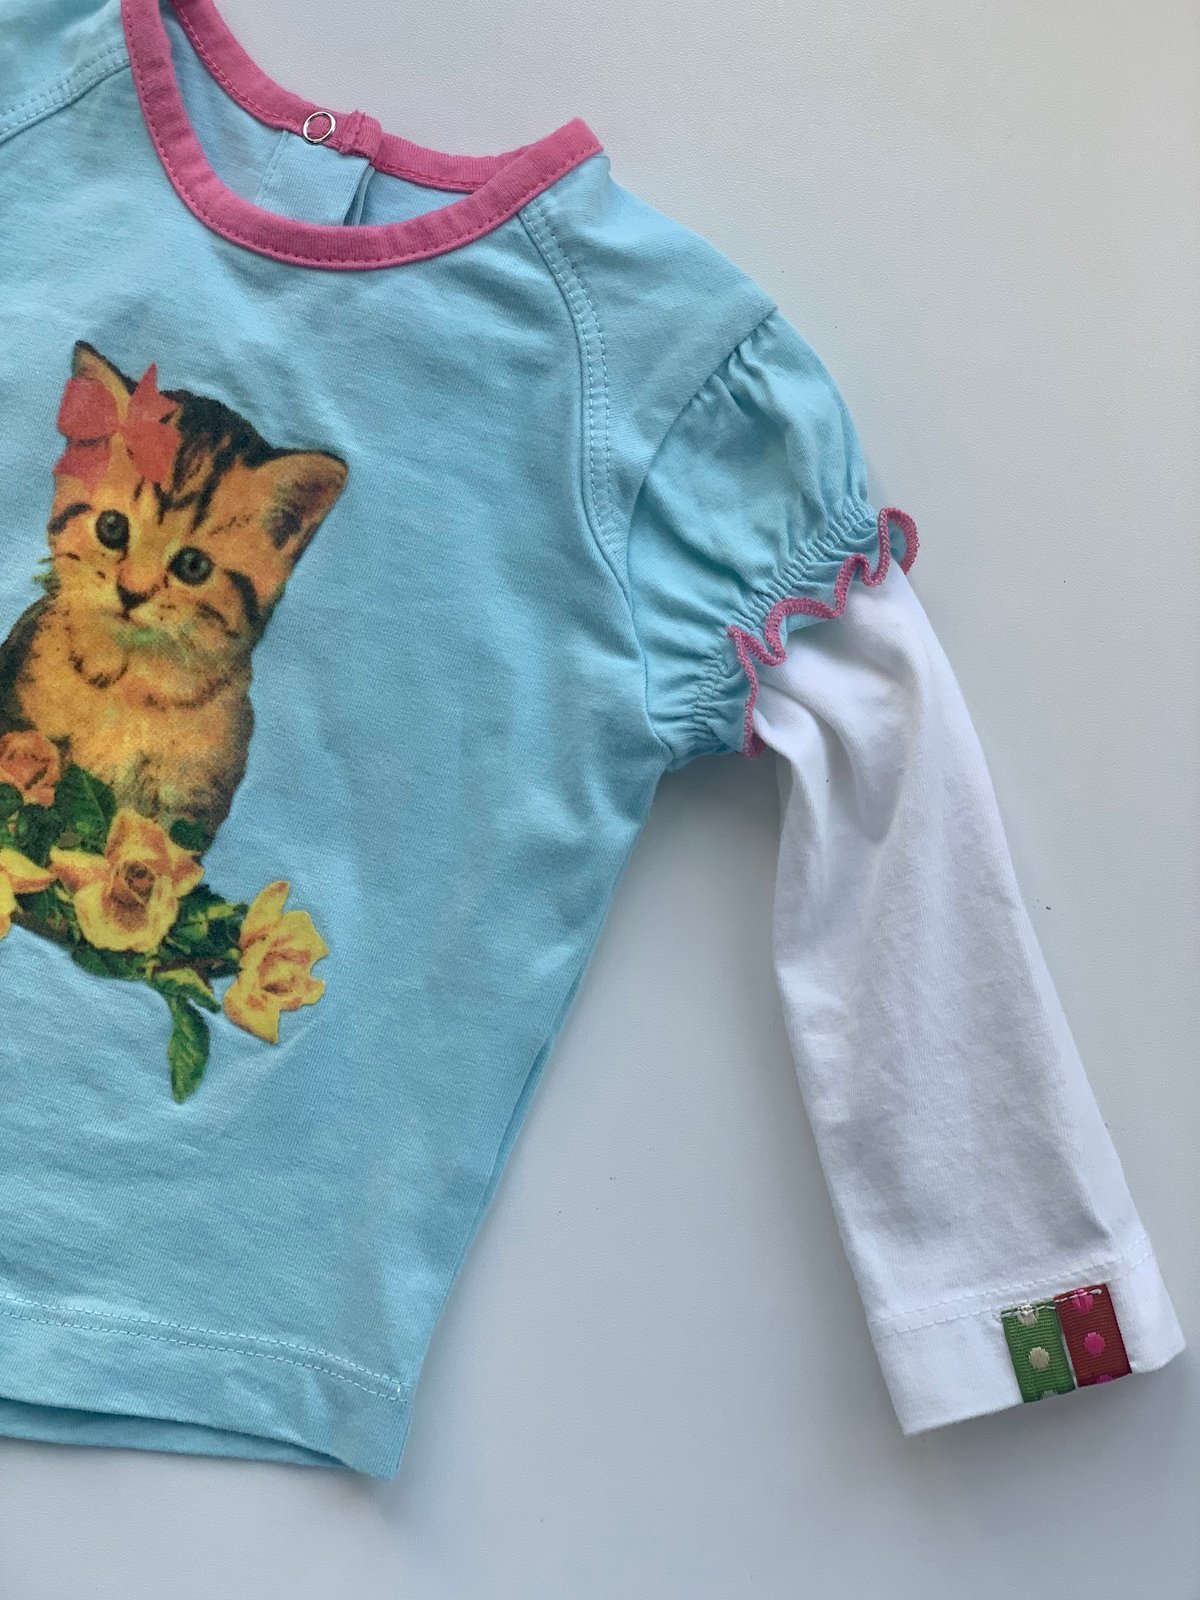 Image of Oilily cat tshirt 6 - 9 months 